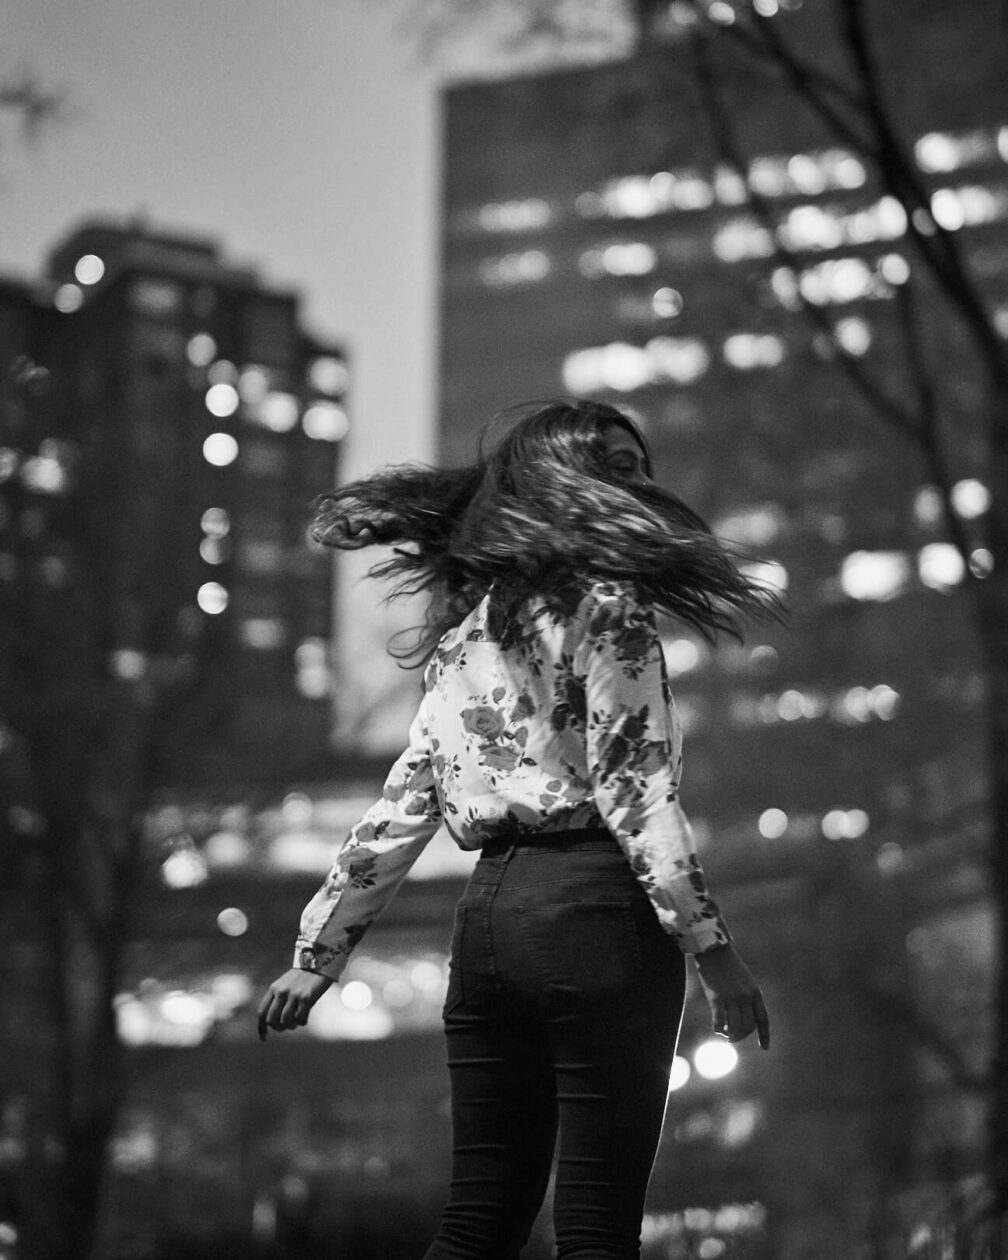 Fuji X Pro2 with xf 56mm f1.2 - Black and White women's fashion portrait photography in Central Park New York - Model: Mousumi